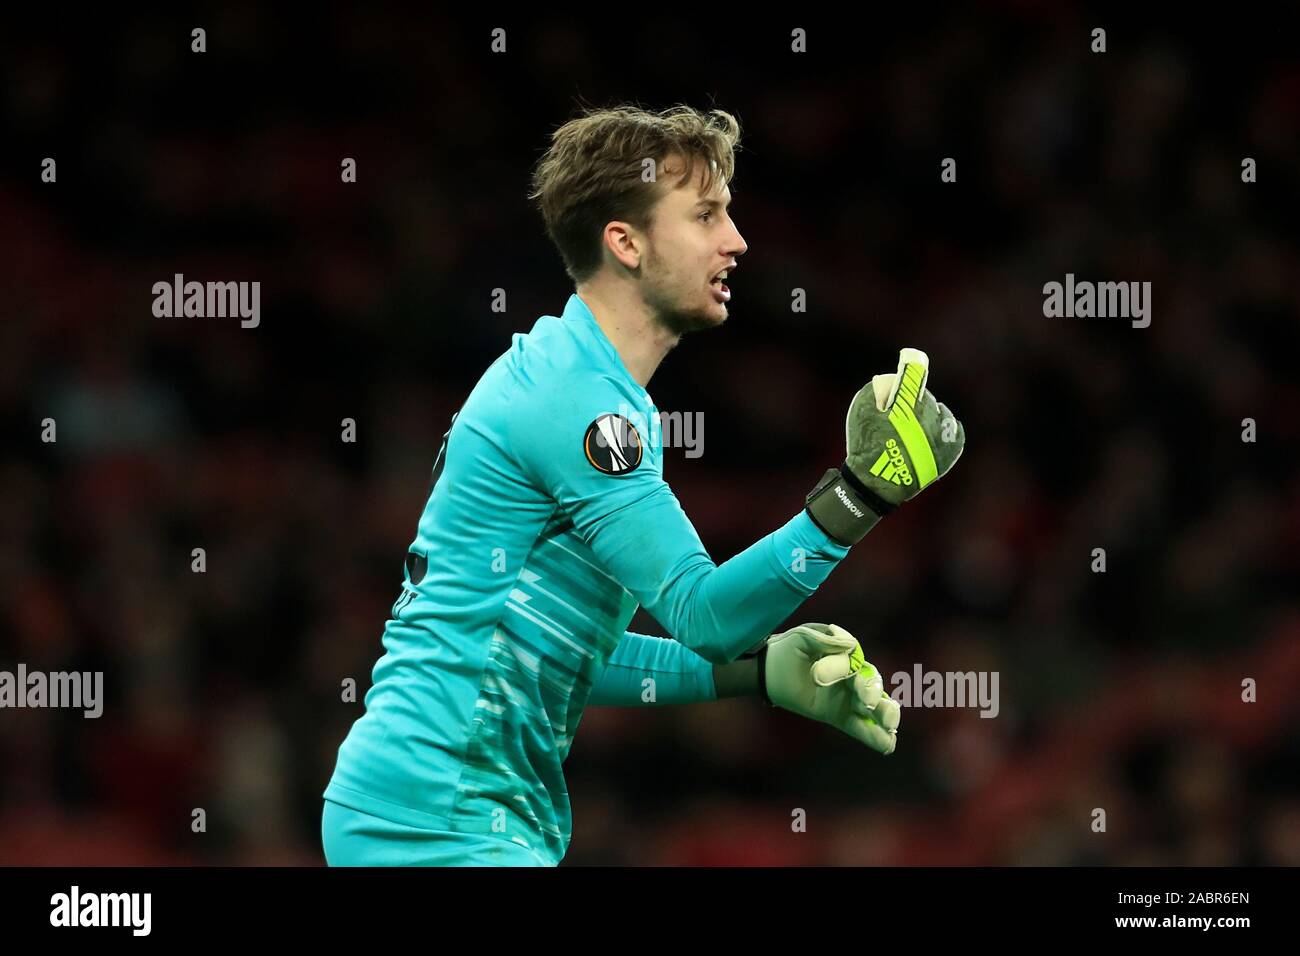 London, UK. 28th November, 2019. Frederik Ronnow of Eintracht Frankfurt during the UEFA Europa League match between Arsenal and Eintracht Frankfurt at the Emirates Stadium, London on Thursday 28th November 2019. (Credit: Leila Coker | MI News) Photograph may only be used for newspaper and/or magazine editorial purposes, license required for commercial use Credit: MI News & Sport /Alamy Live News Stock Photo